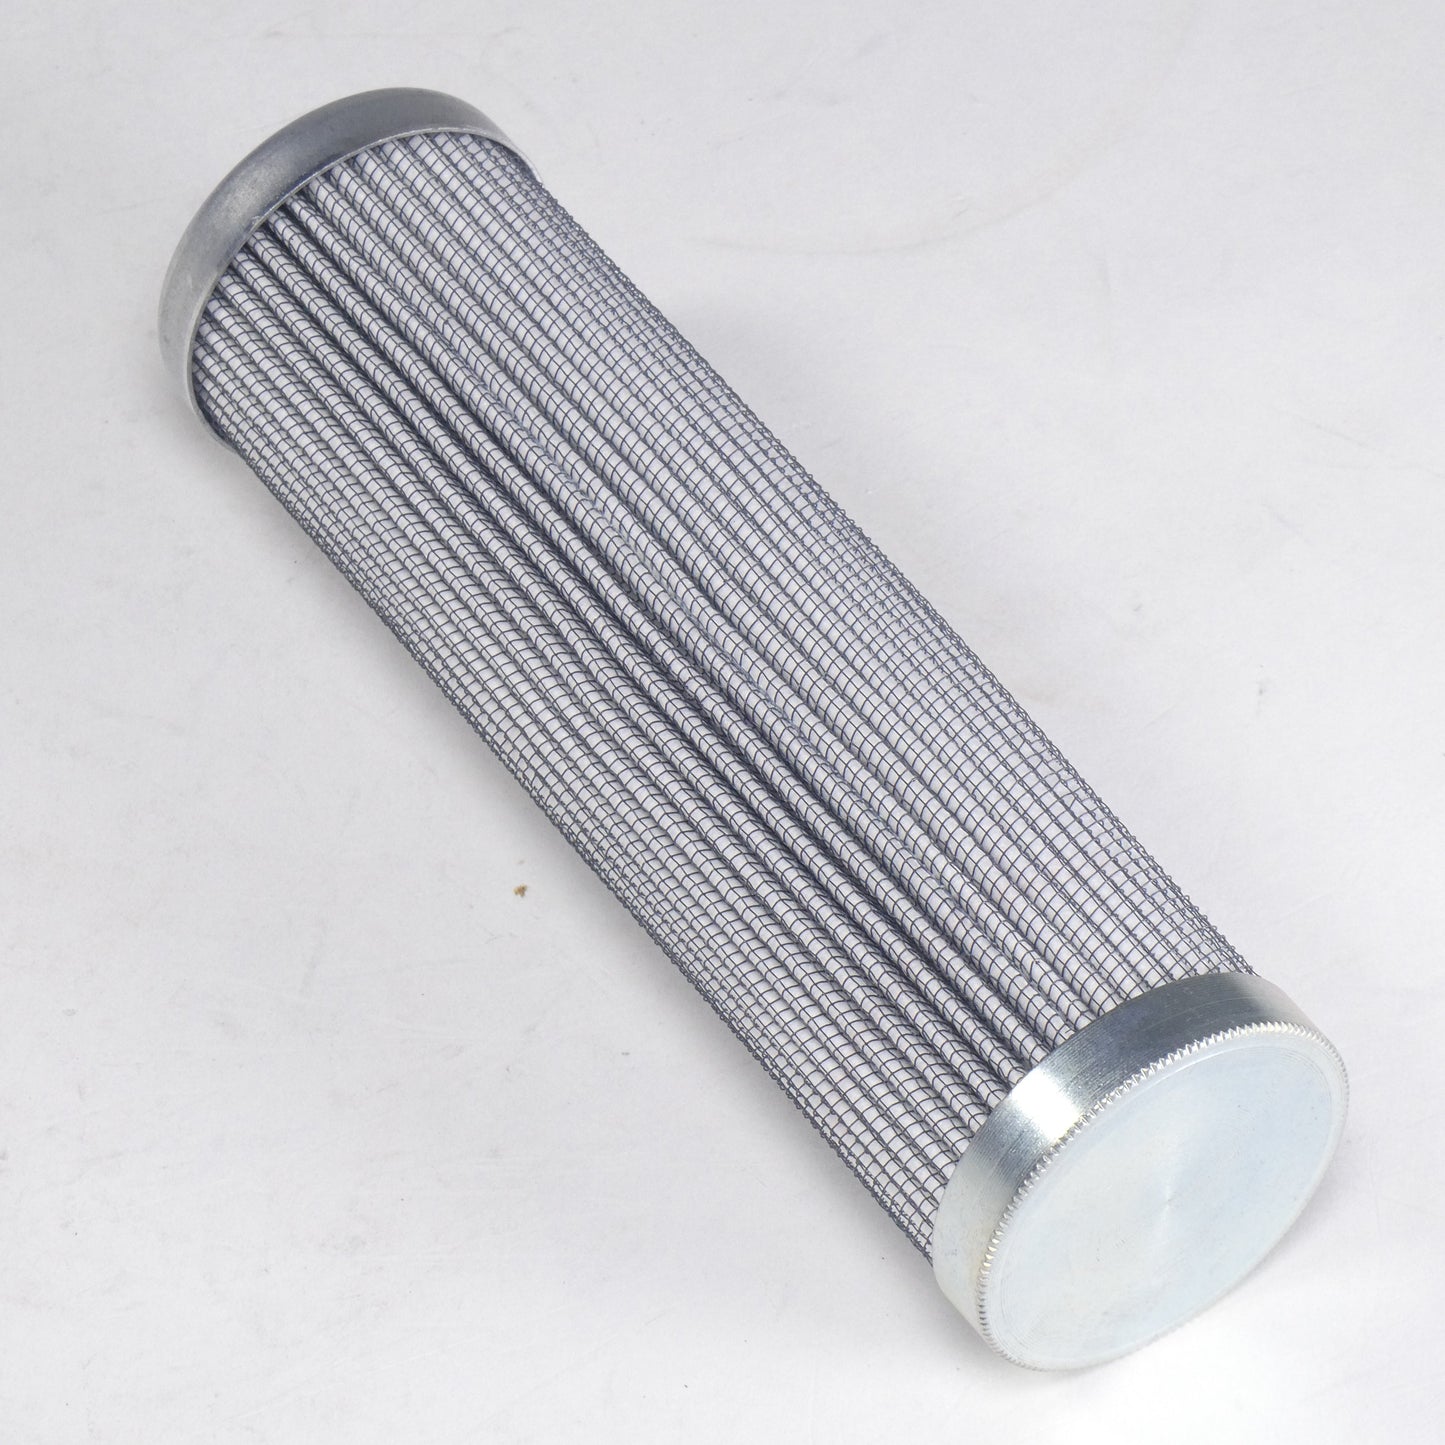 Hydrafil Replacement Filter Element for Argo V3.0516-15